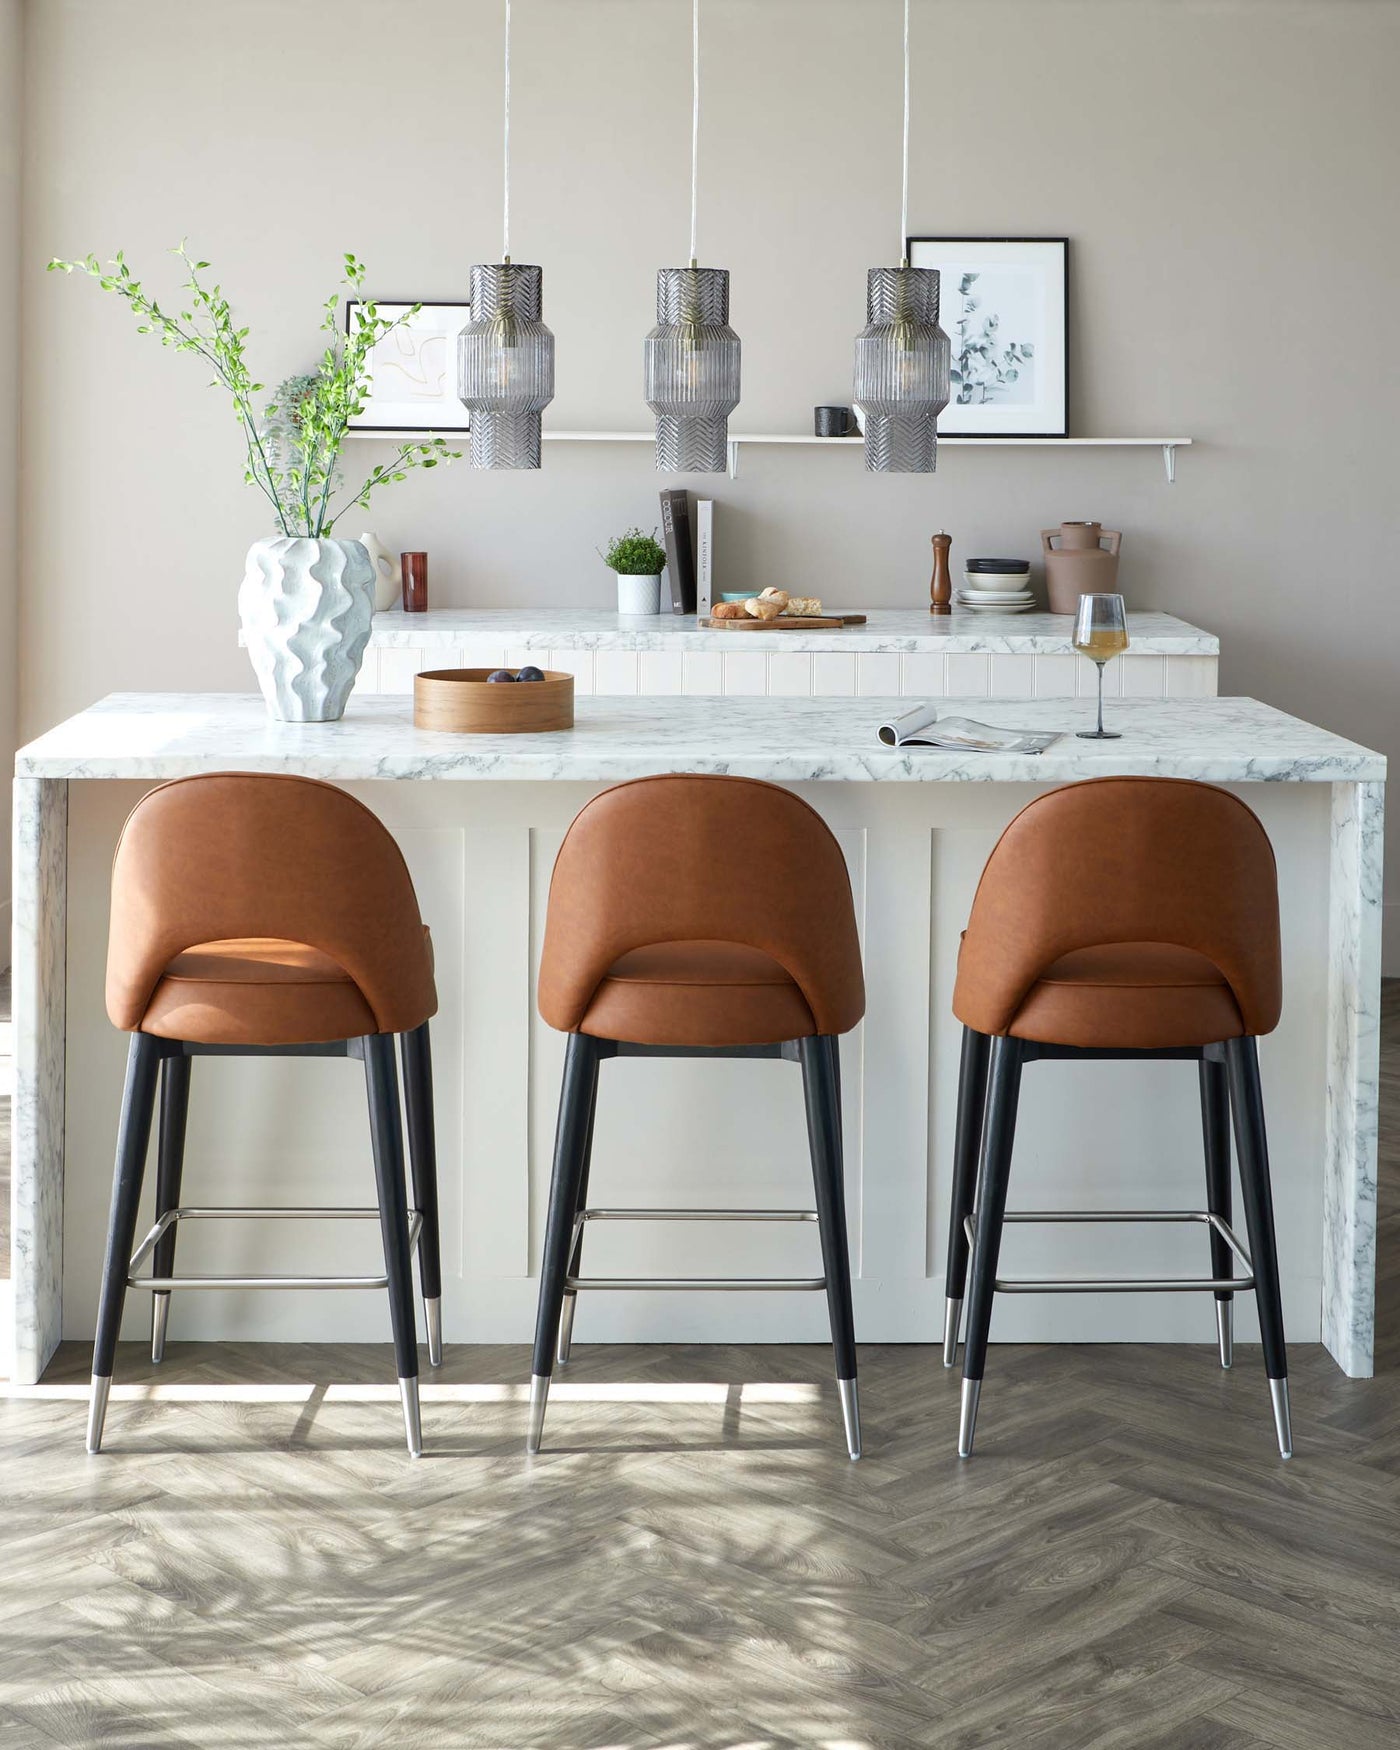 Three modern bar stools with brown leather seats and black metal legs in front of a white marble countertop.